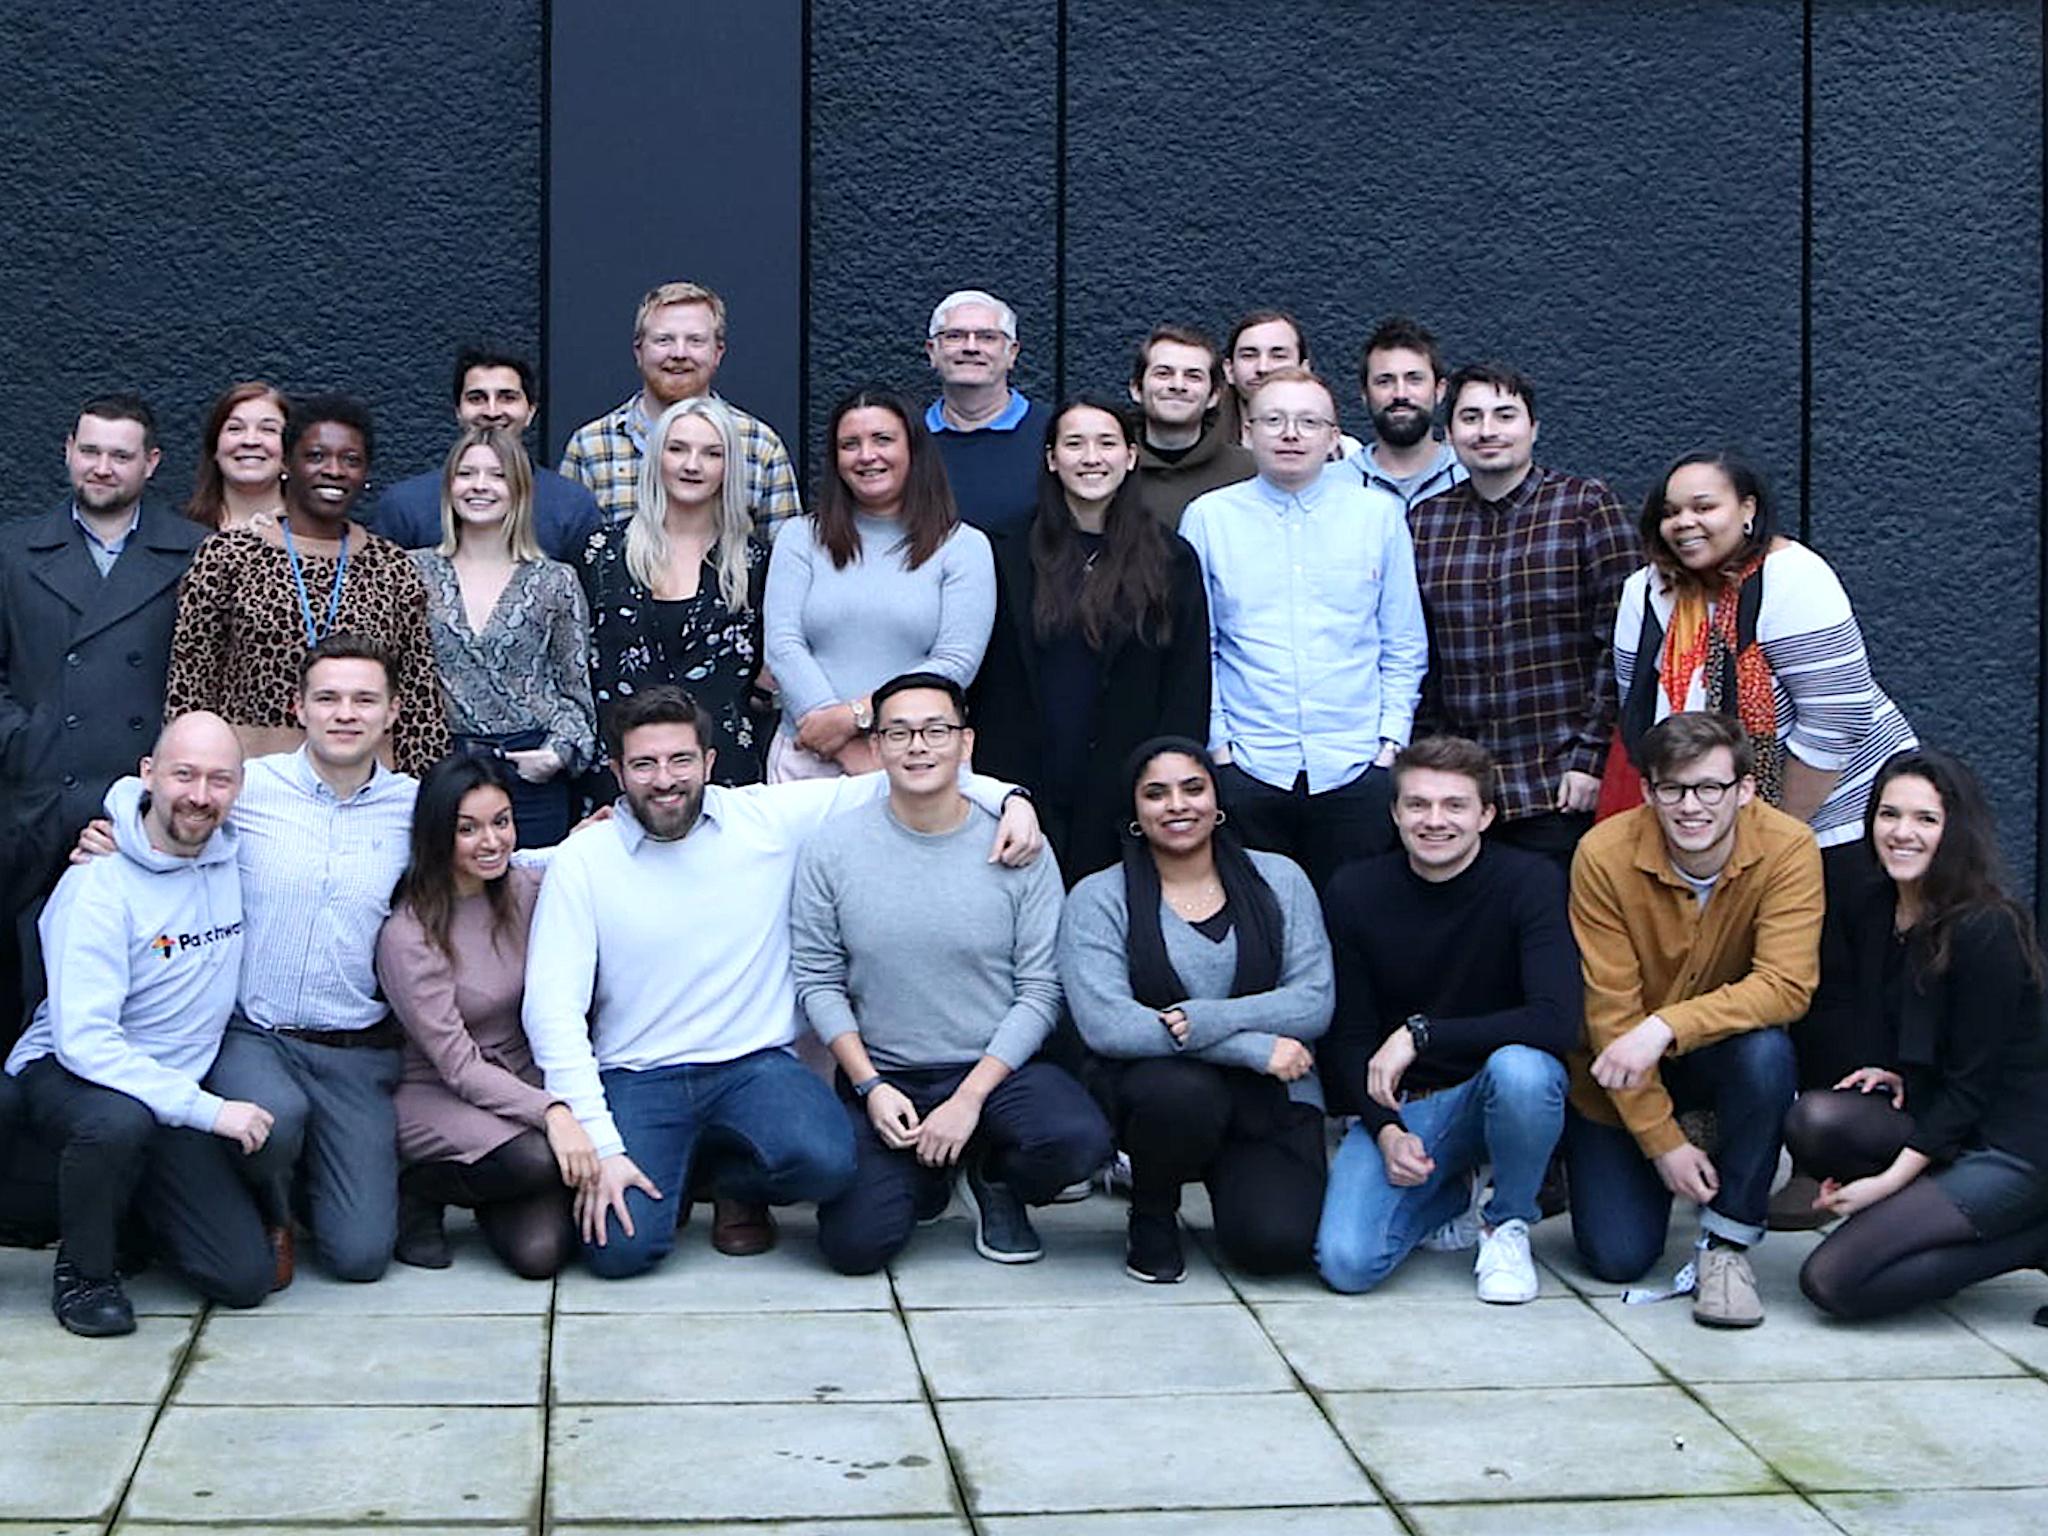 The team at Patchwork, a platform that fills staff vacancies within the NHS